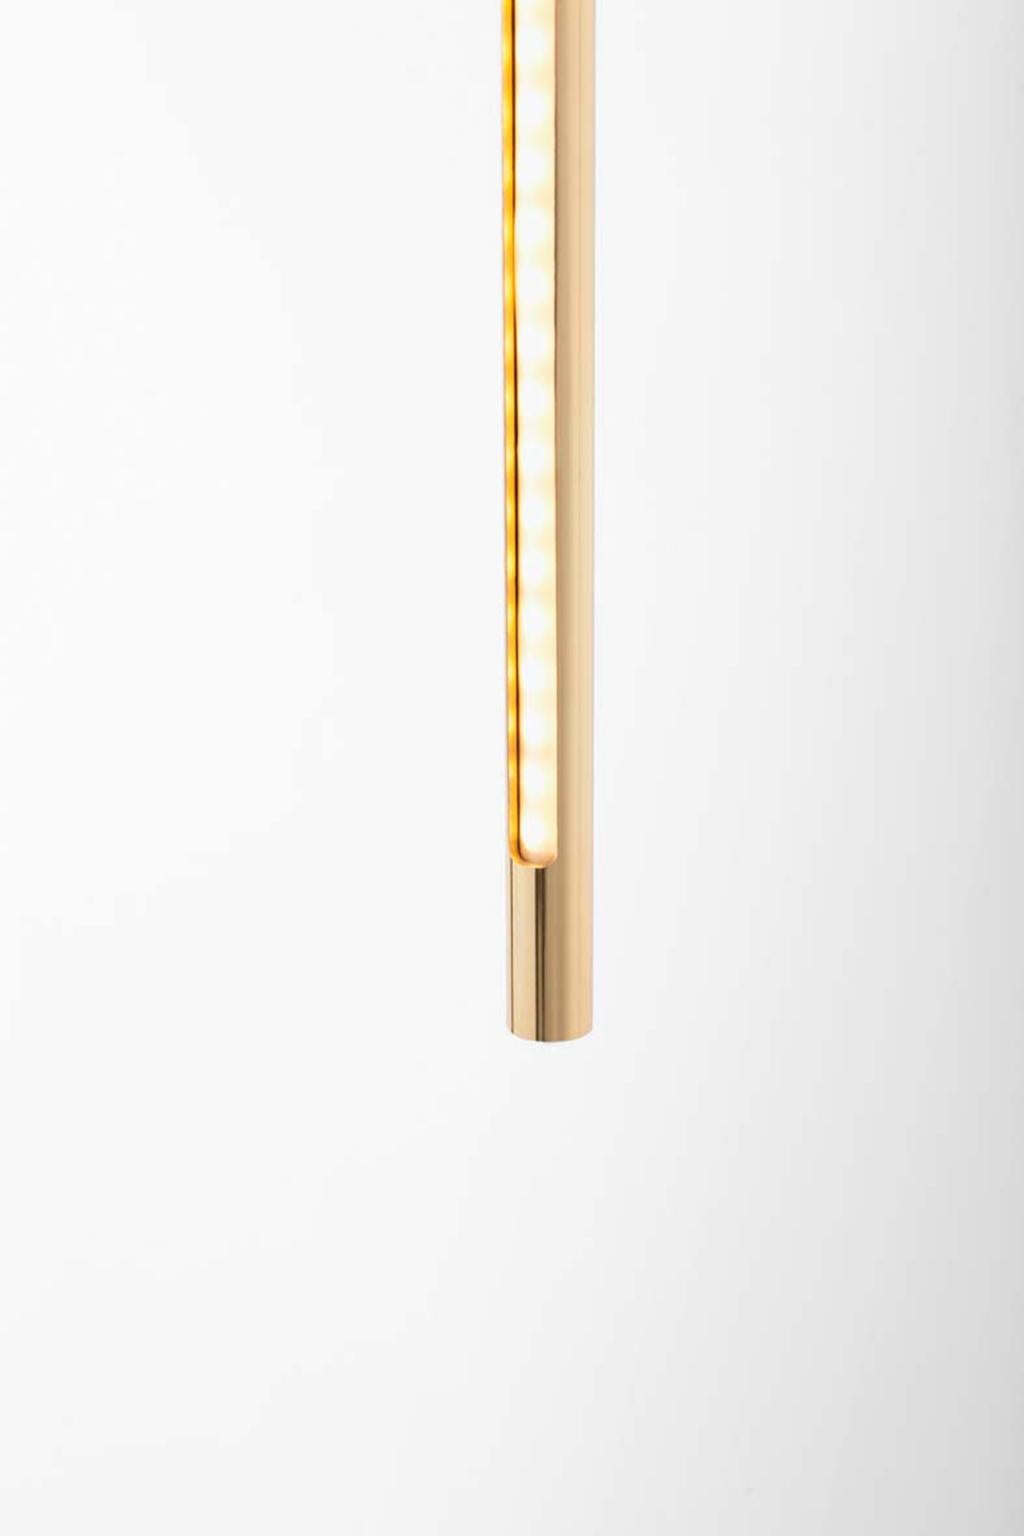 Polished Gold Contemporary Ceiling Lamp in Tubular Brass, LED Lamp Type For Sale